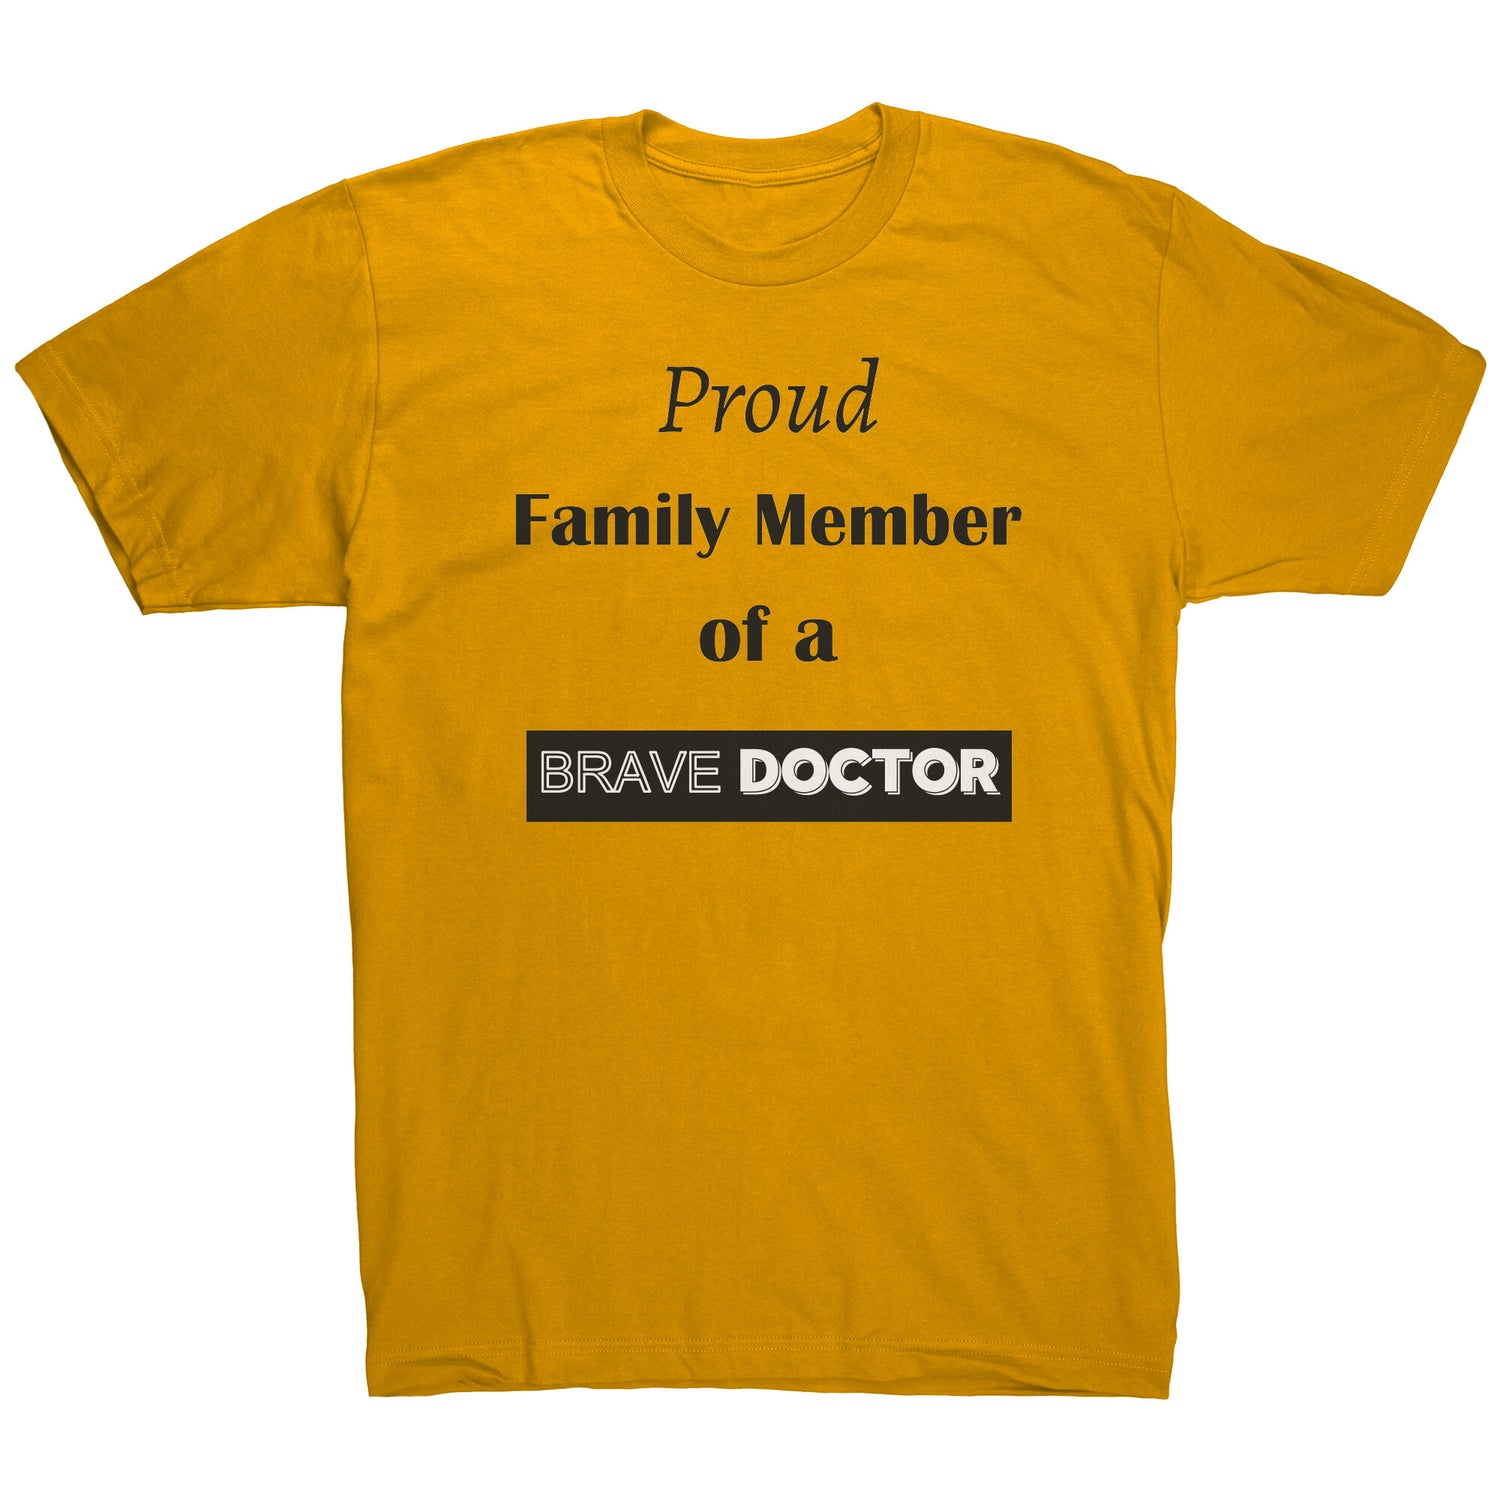 Proud Family Member of a Brave Doctor Lettering Mens Shirt - Signs and Seasons Gifts